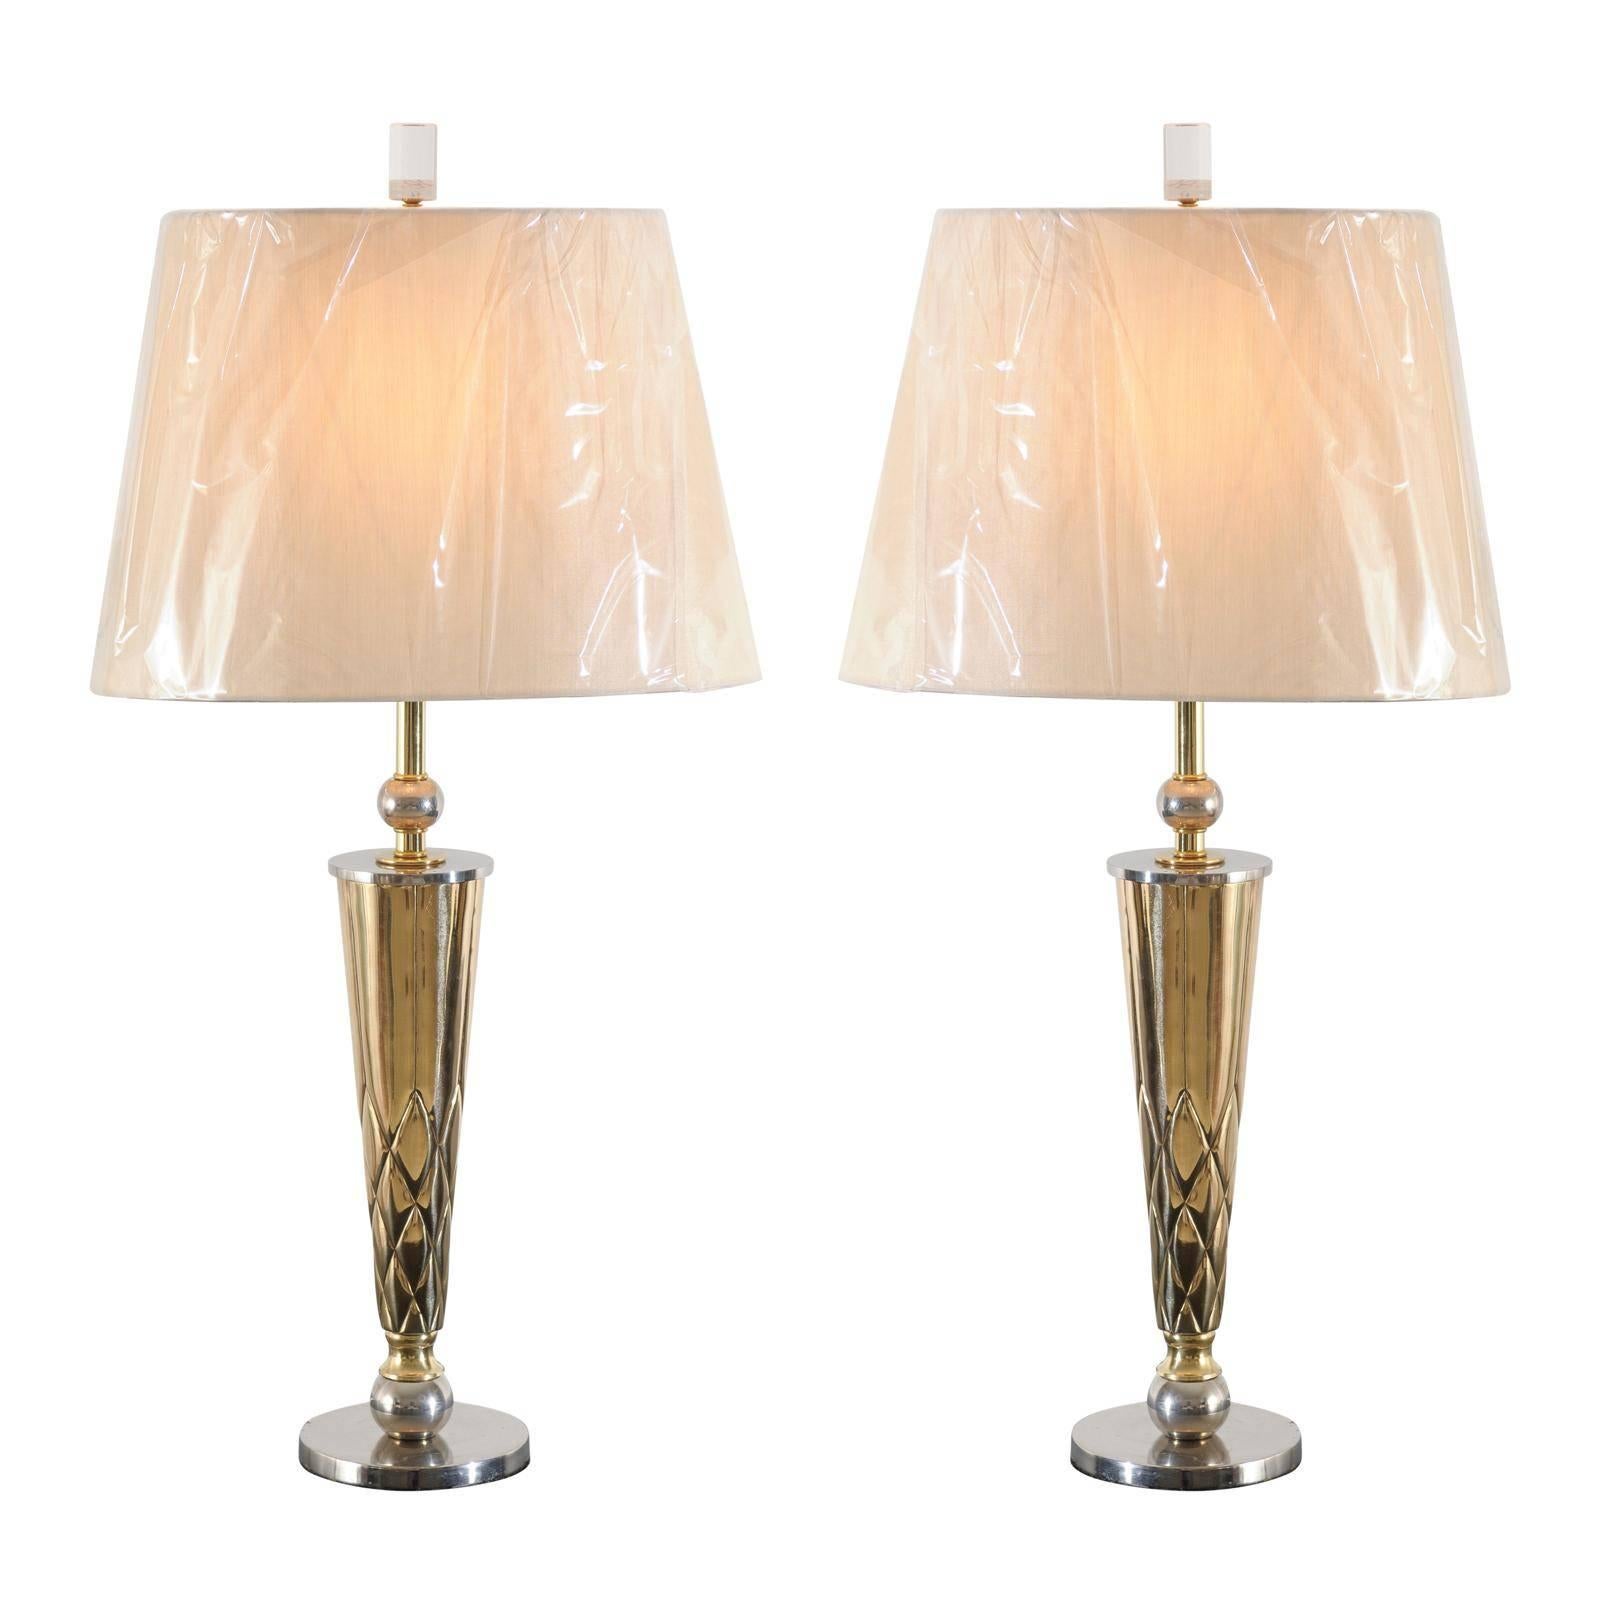 Unique Restored Pair of Vintage Tornado Console Lamps in Nickel and Brass, For Sale